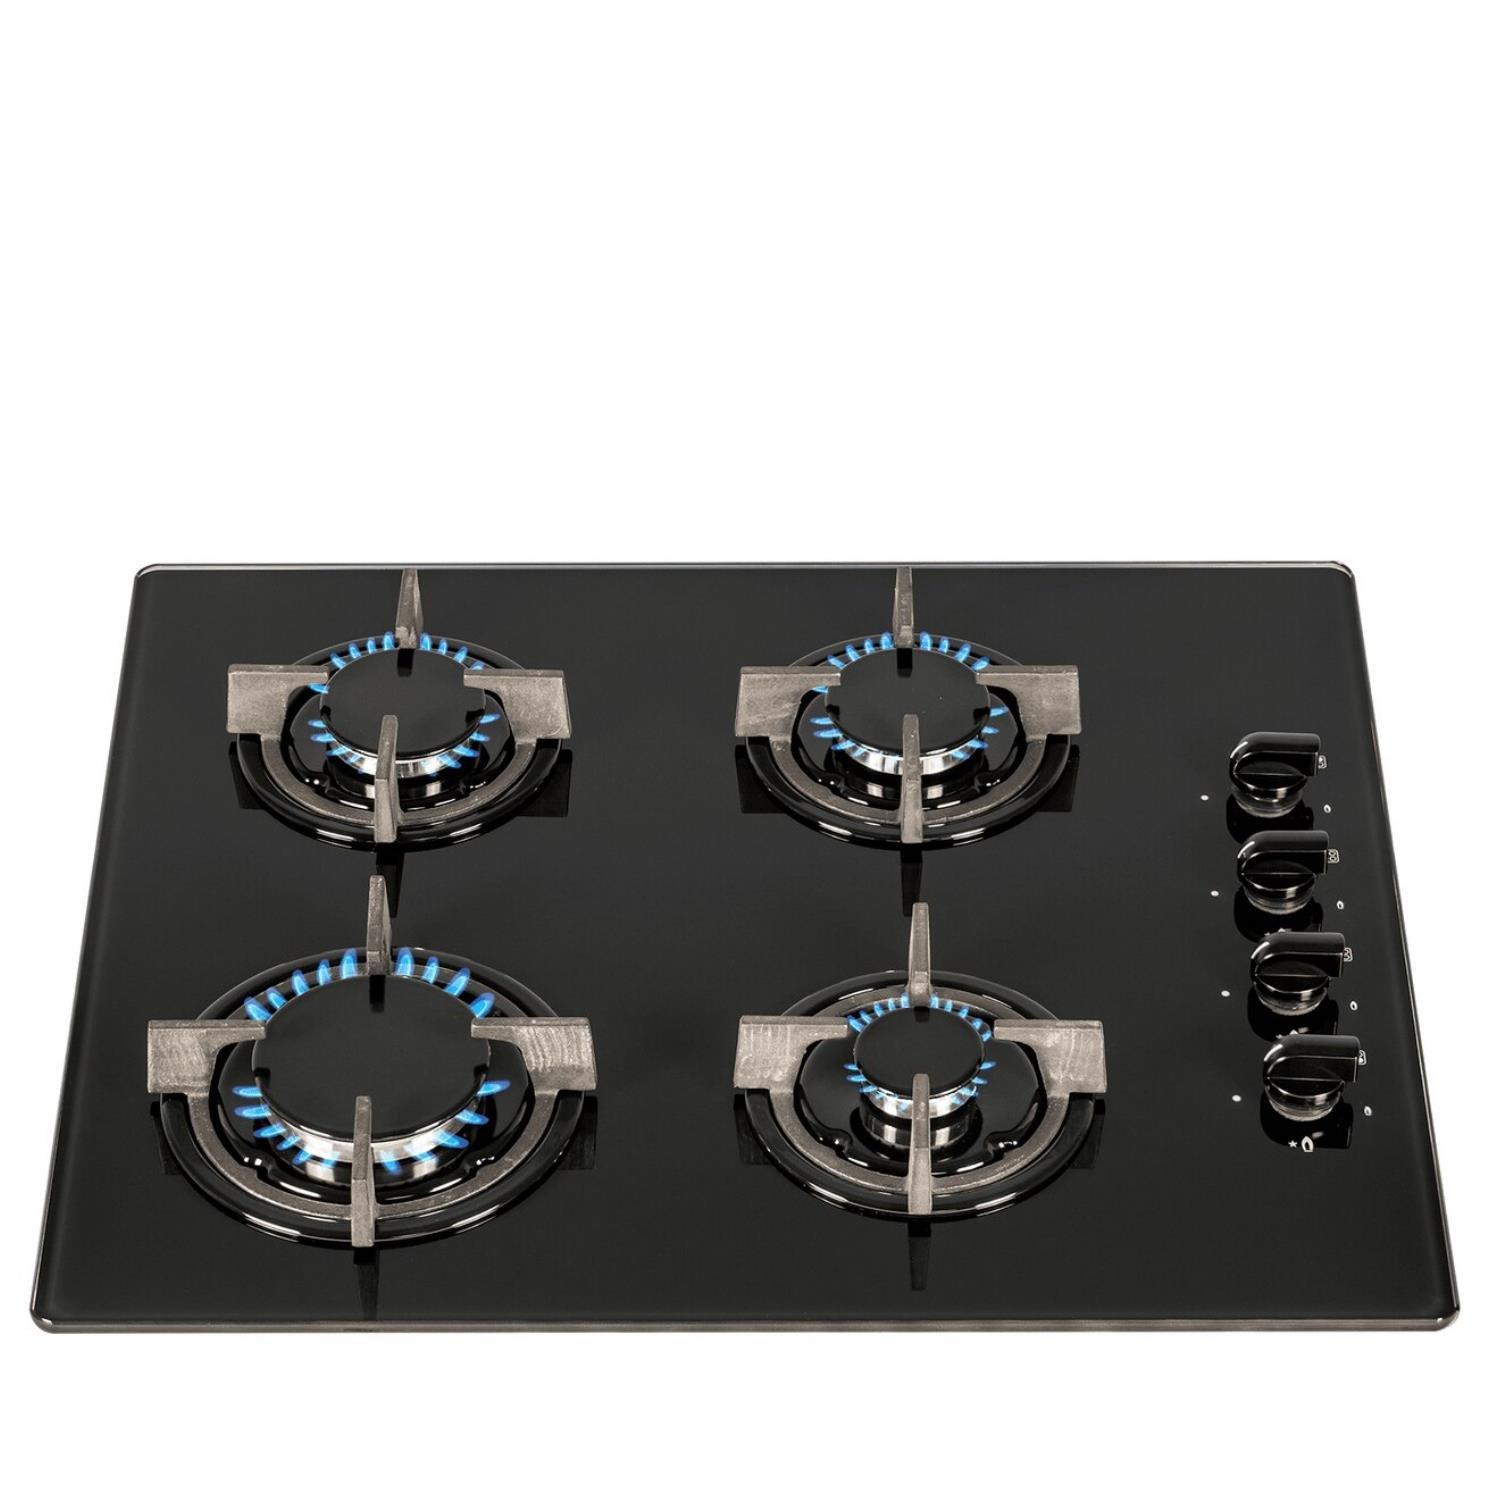 60cm 4 Burner Gas On Glass Hob In Black With Cast Iron Pan Stands- GHG602BL